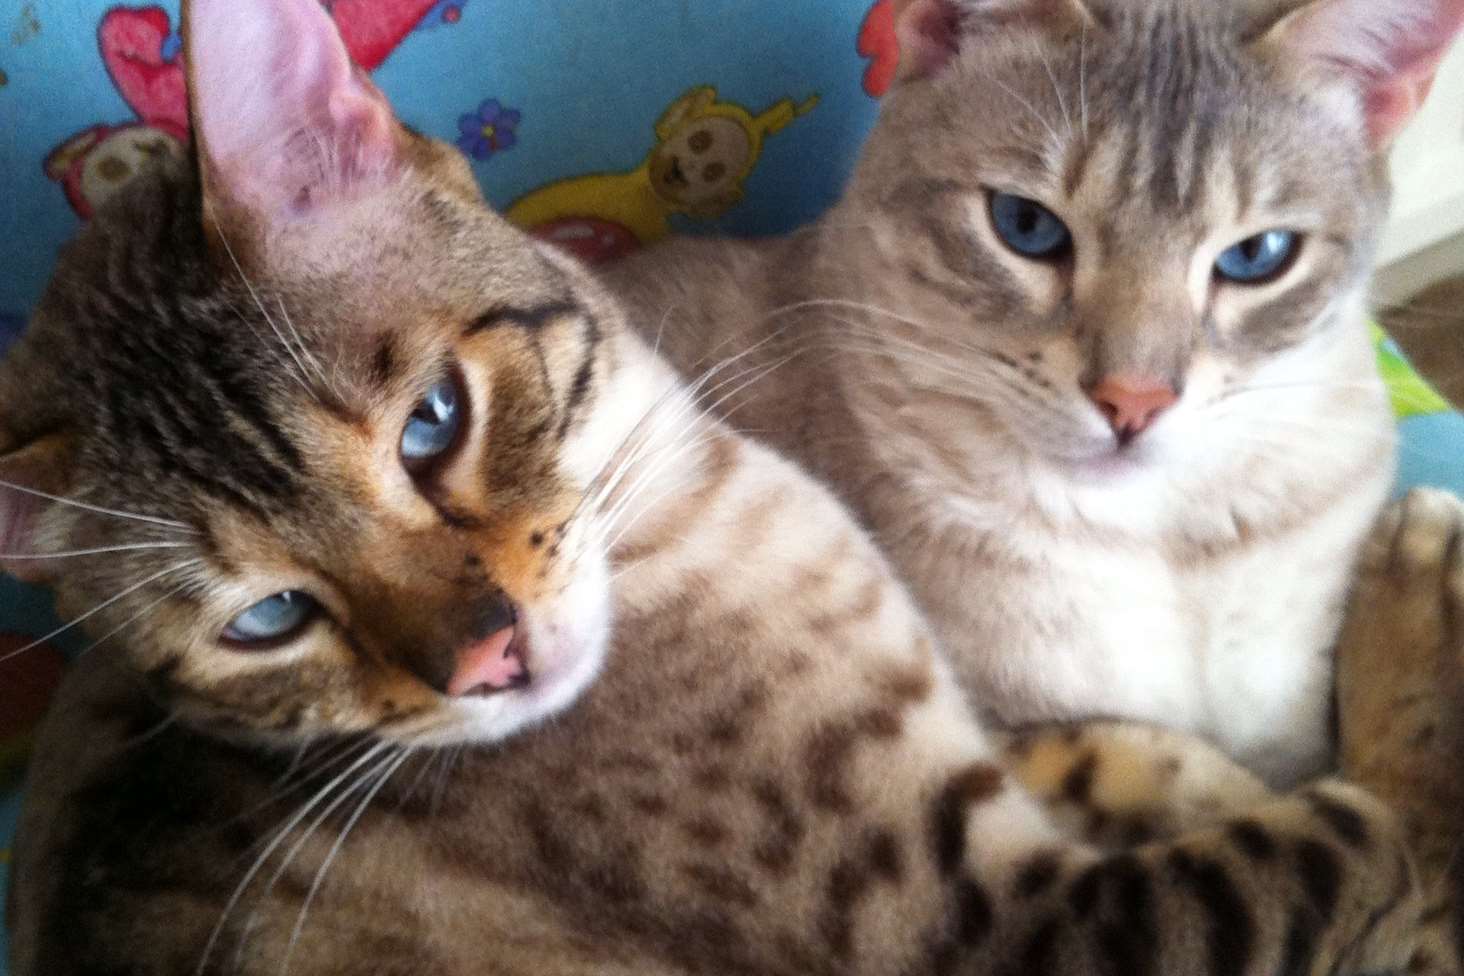 Nuzzle and Scratch have been missing since Wednesday